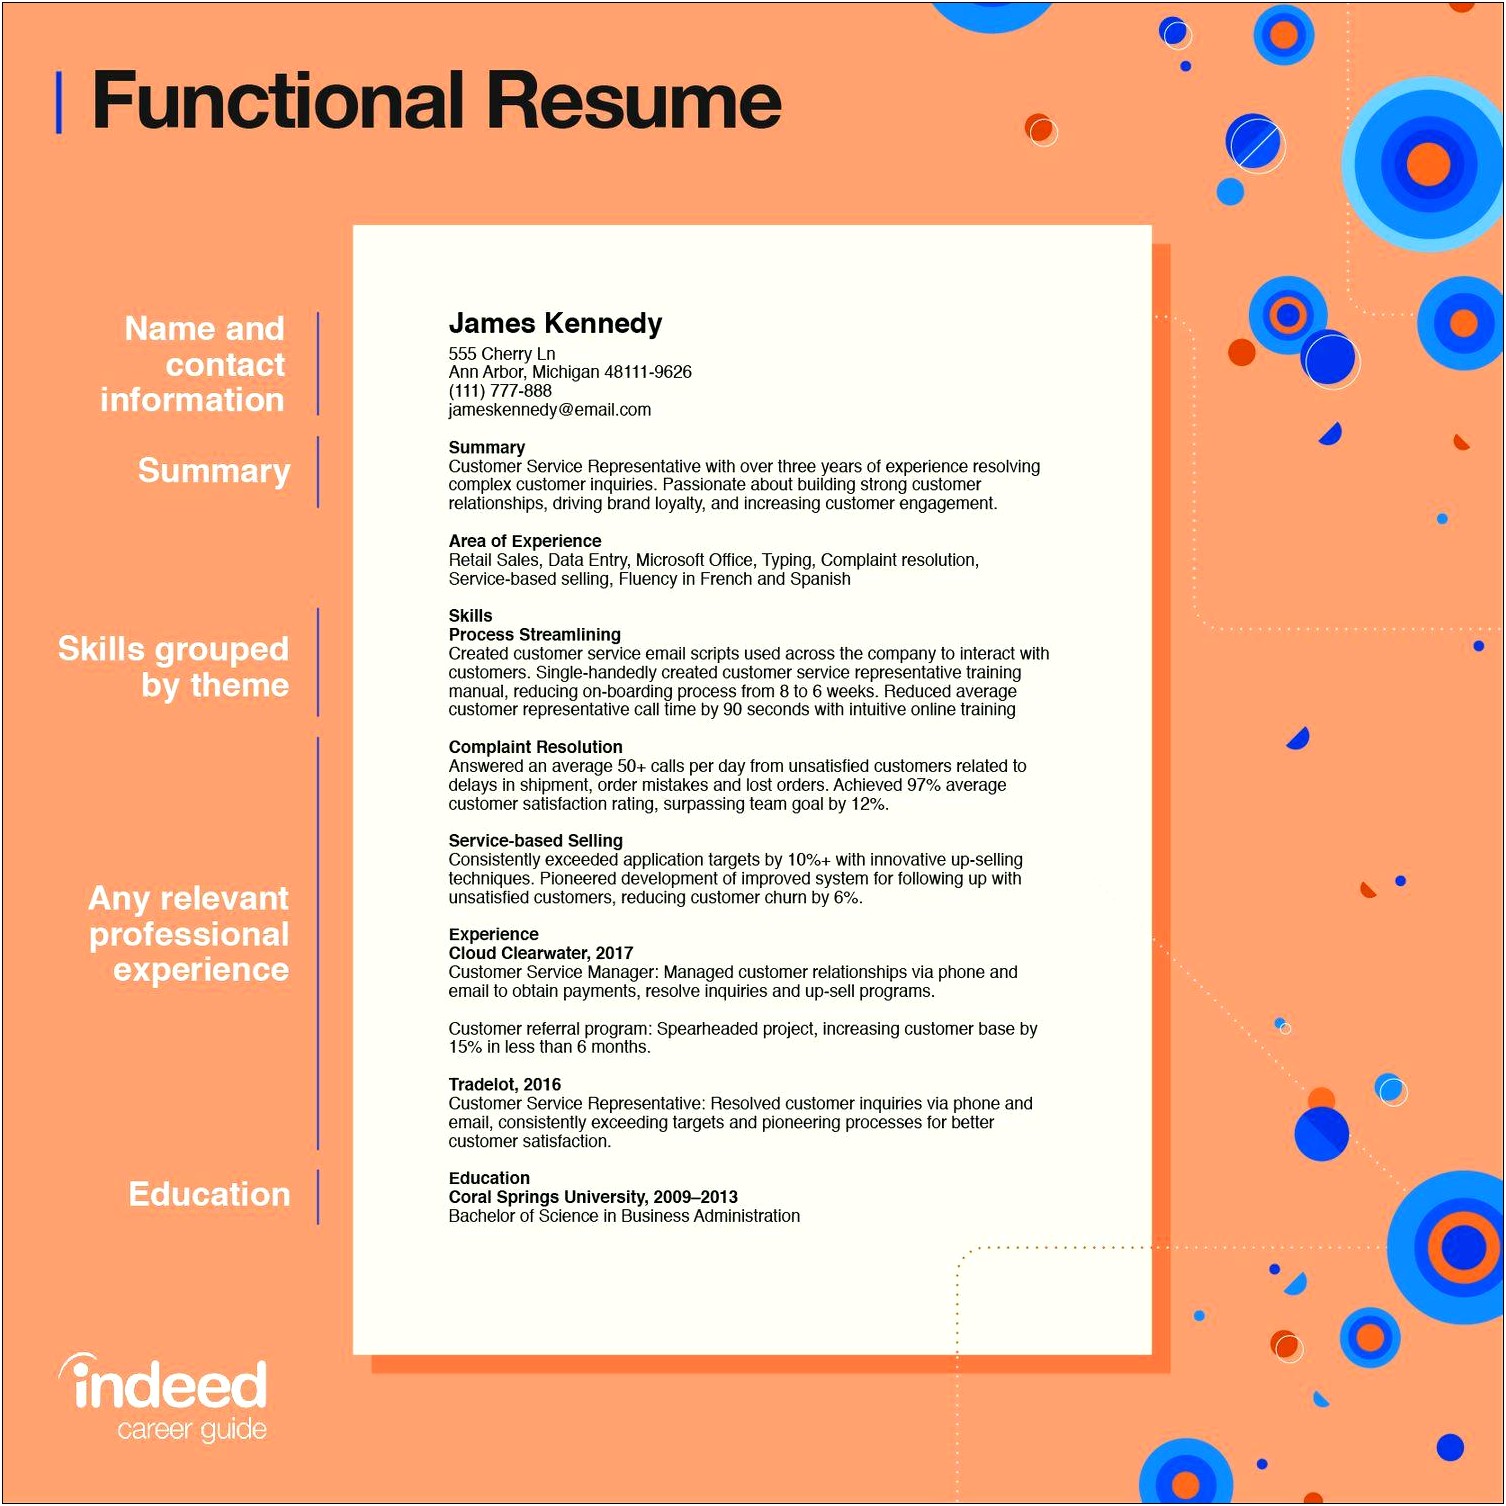 Basic Skills To Have On A Resume